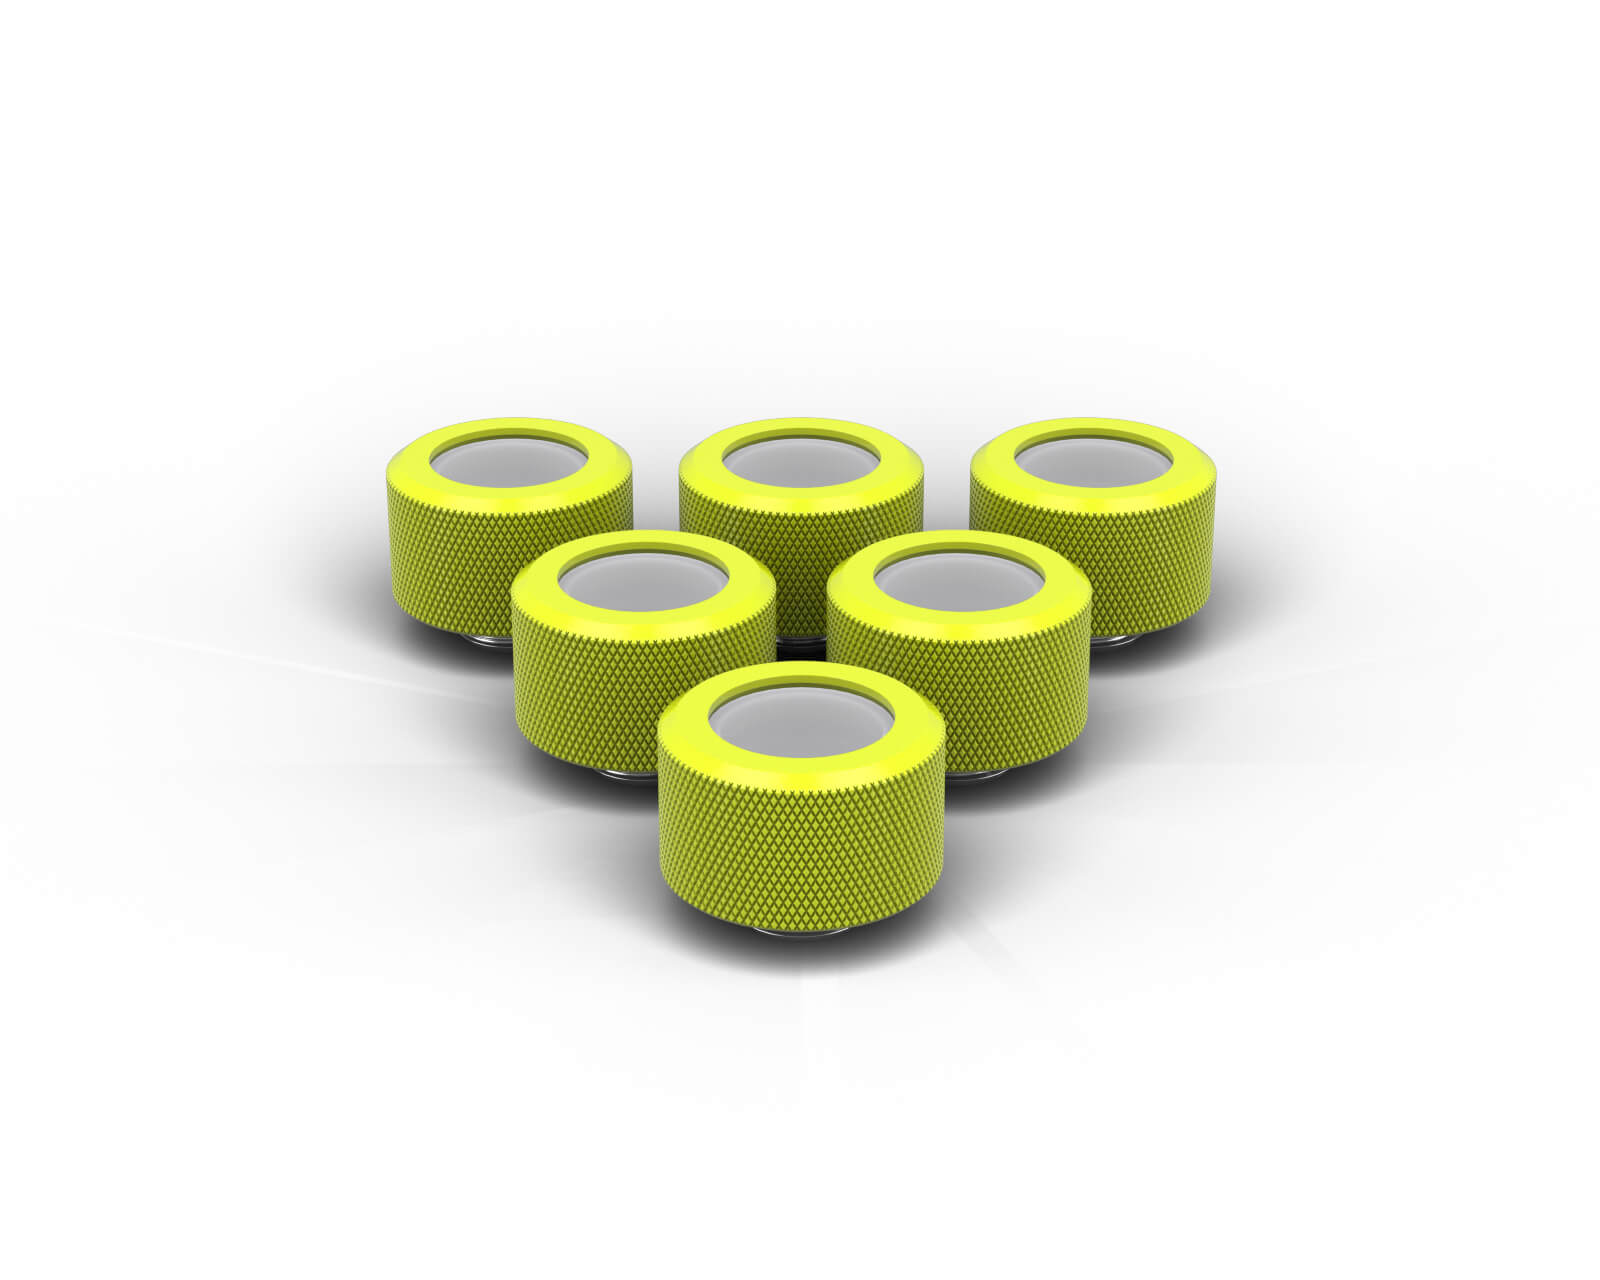 PrimoChill 16mm OD Rigid SX Fitting - 6 Pack - PrimoChill - KEEPING IT COOL Lime Yellow